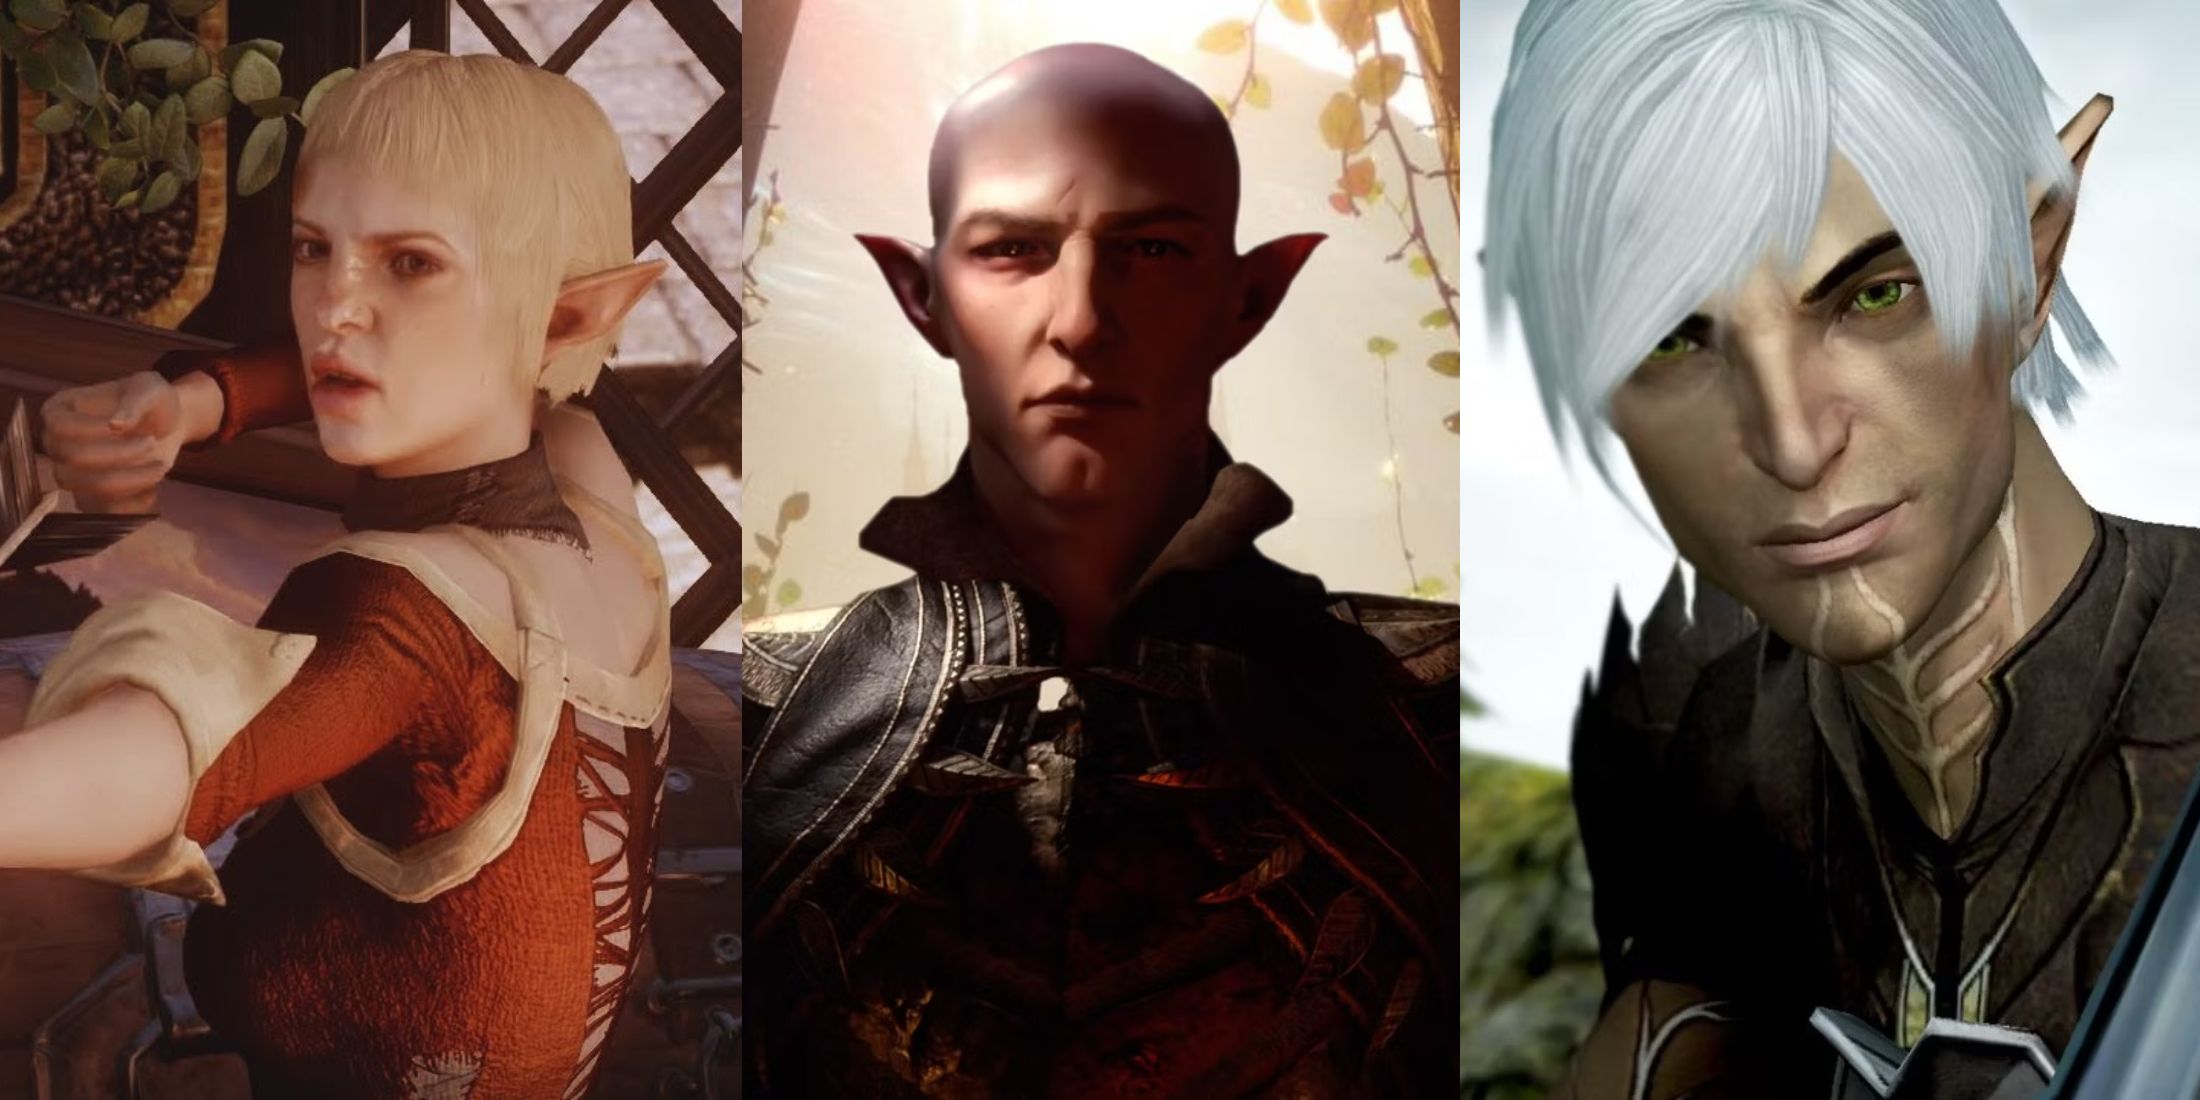 Dragon Age_ Strongest Elves, Ranked split image Sera and Solas from DA INquisition, Fenris from DA 2